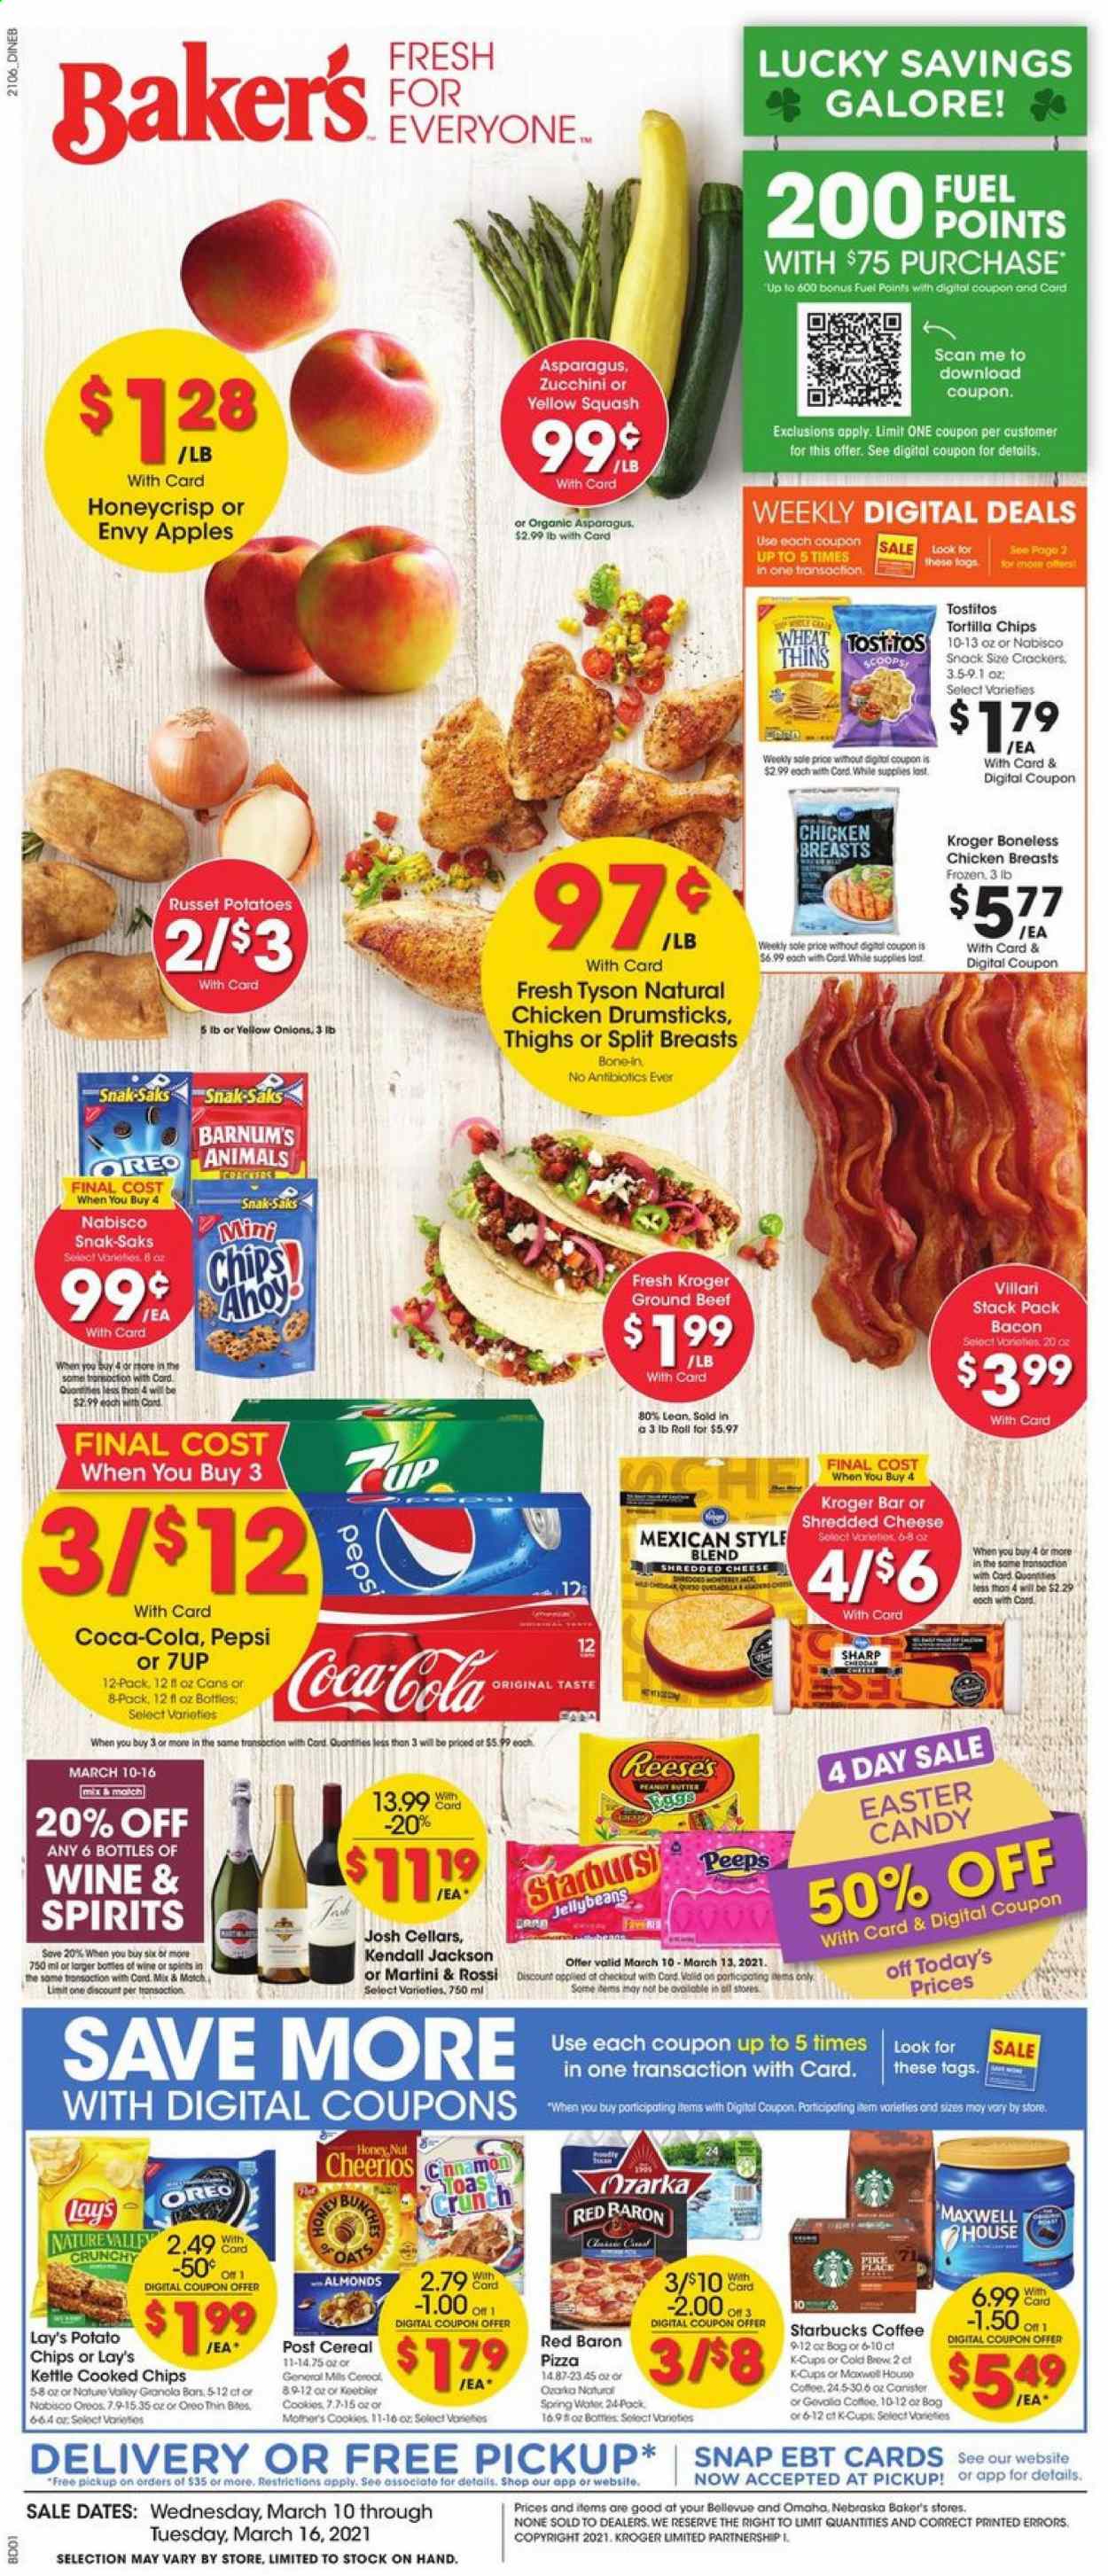 thumbnail - Baker's Flyer - 03/10/2021 - 03/16/2021 - Sales products - toast bread, apples, northern pike, pizza, shredded cheese, Oreo, eggs, Reese's, zucchini, Red Baron, cookies, Peeps, tortilla chips, potato chips, Lay’s, Thins, Tostitos, oats, cereals, Cheerios, granola bar, Nature Valley, cinnamon, almonds, Coca-Cola, Pepsi, 7UP, spring water, Maxwell House, coffee, Starbucks, coffee capsules, K-Cups, Gevalia, wine, Martini, chicken breasts, chicken drumsticks, beef meat, ground beef, canister, Sharp, Bakers, bunches. Page 1.